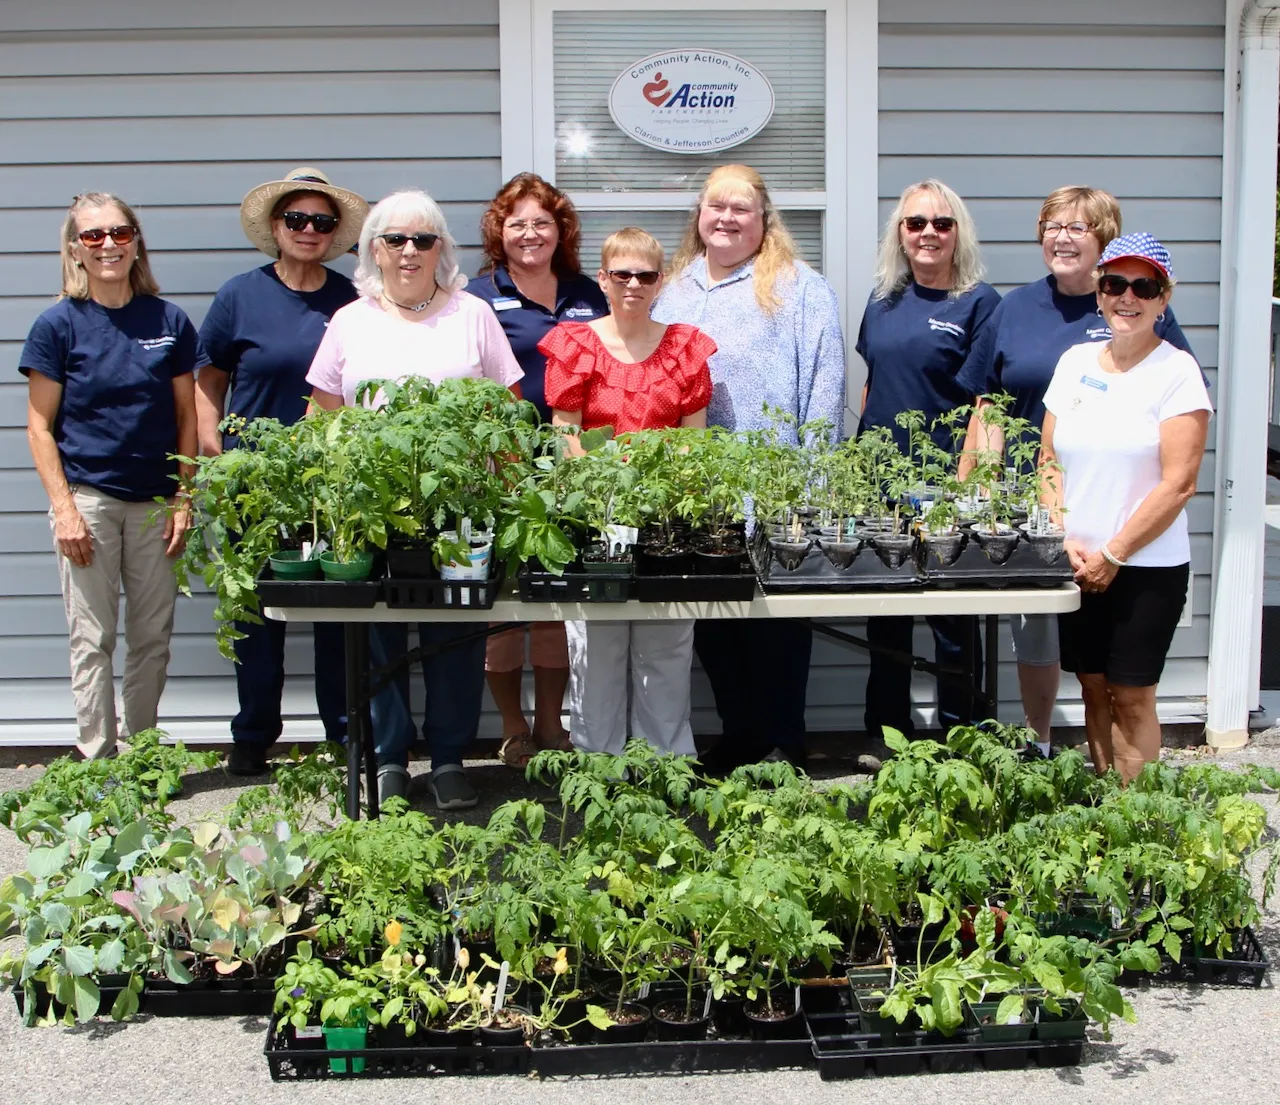 (Pictured above: Clarion Master Gardeners presenting vegetables to Community Action are Alice Thurau, Pam Hufnagel, Liz Gallagher, Melissa Dolecki (Penn State Extension), Community Action Case Manager Heather Reynolds, Community Action Executive Director Sue Fusco, Sue McElhattan, Stephanie Wilshire, and Rosie Lawrence.)
